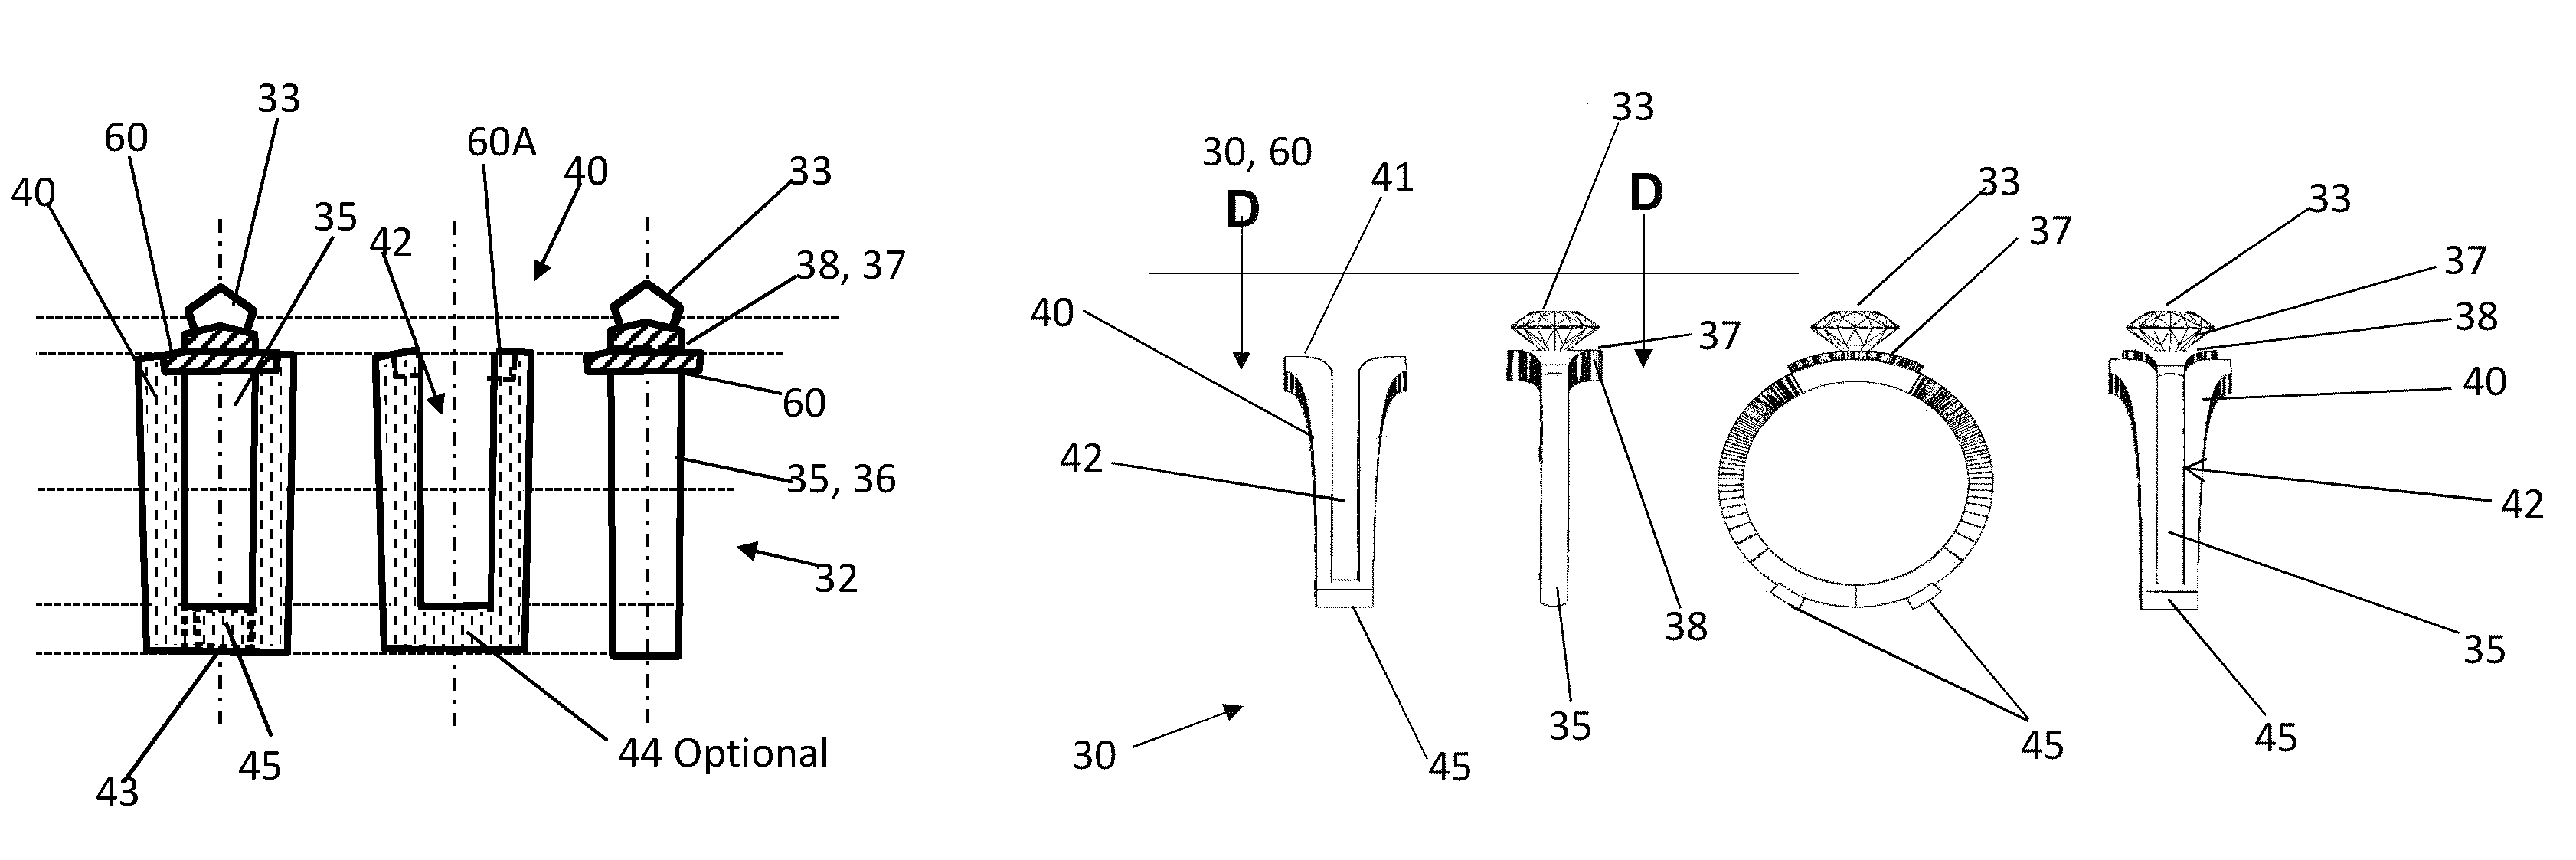 Interlocking ring system and device with interchangeable outer jackets and center rings called a TULIP